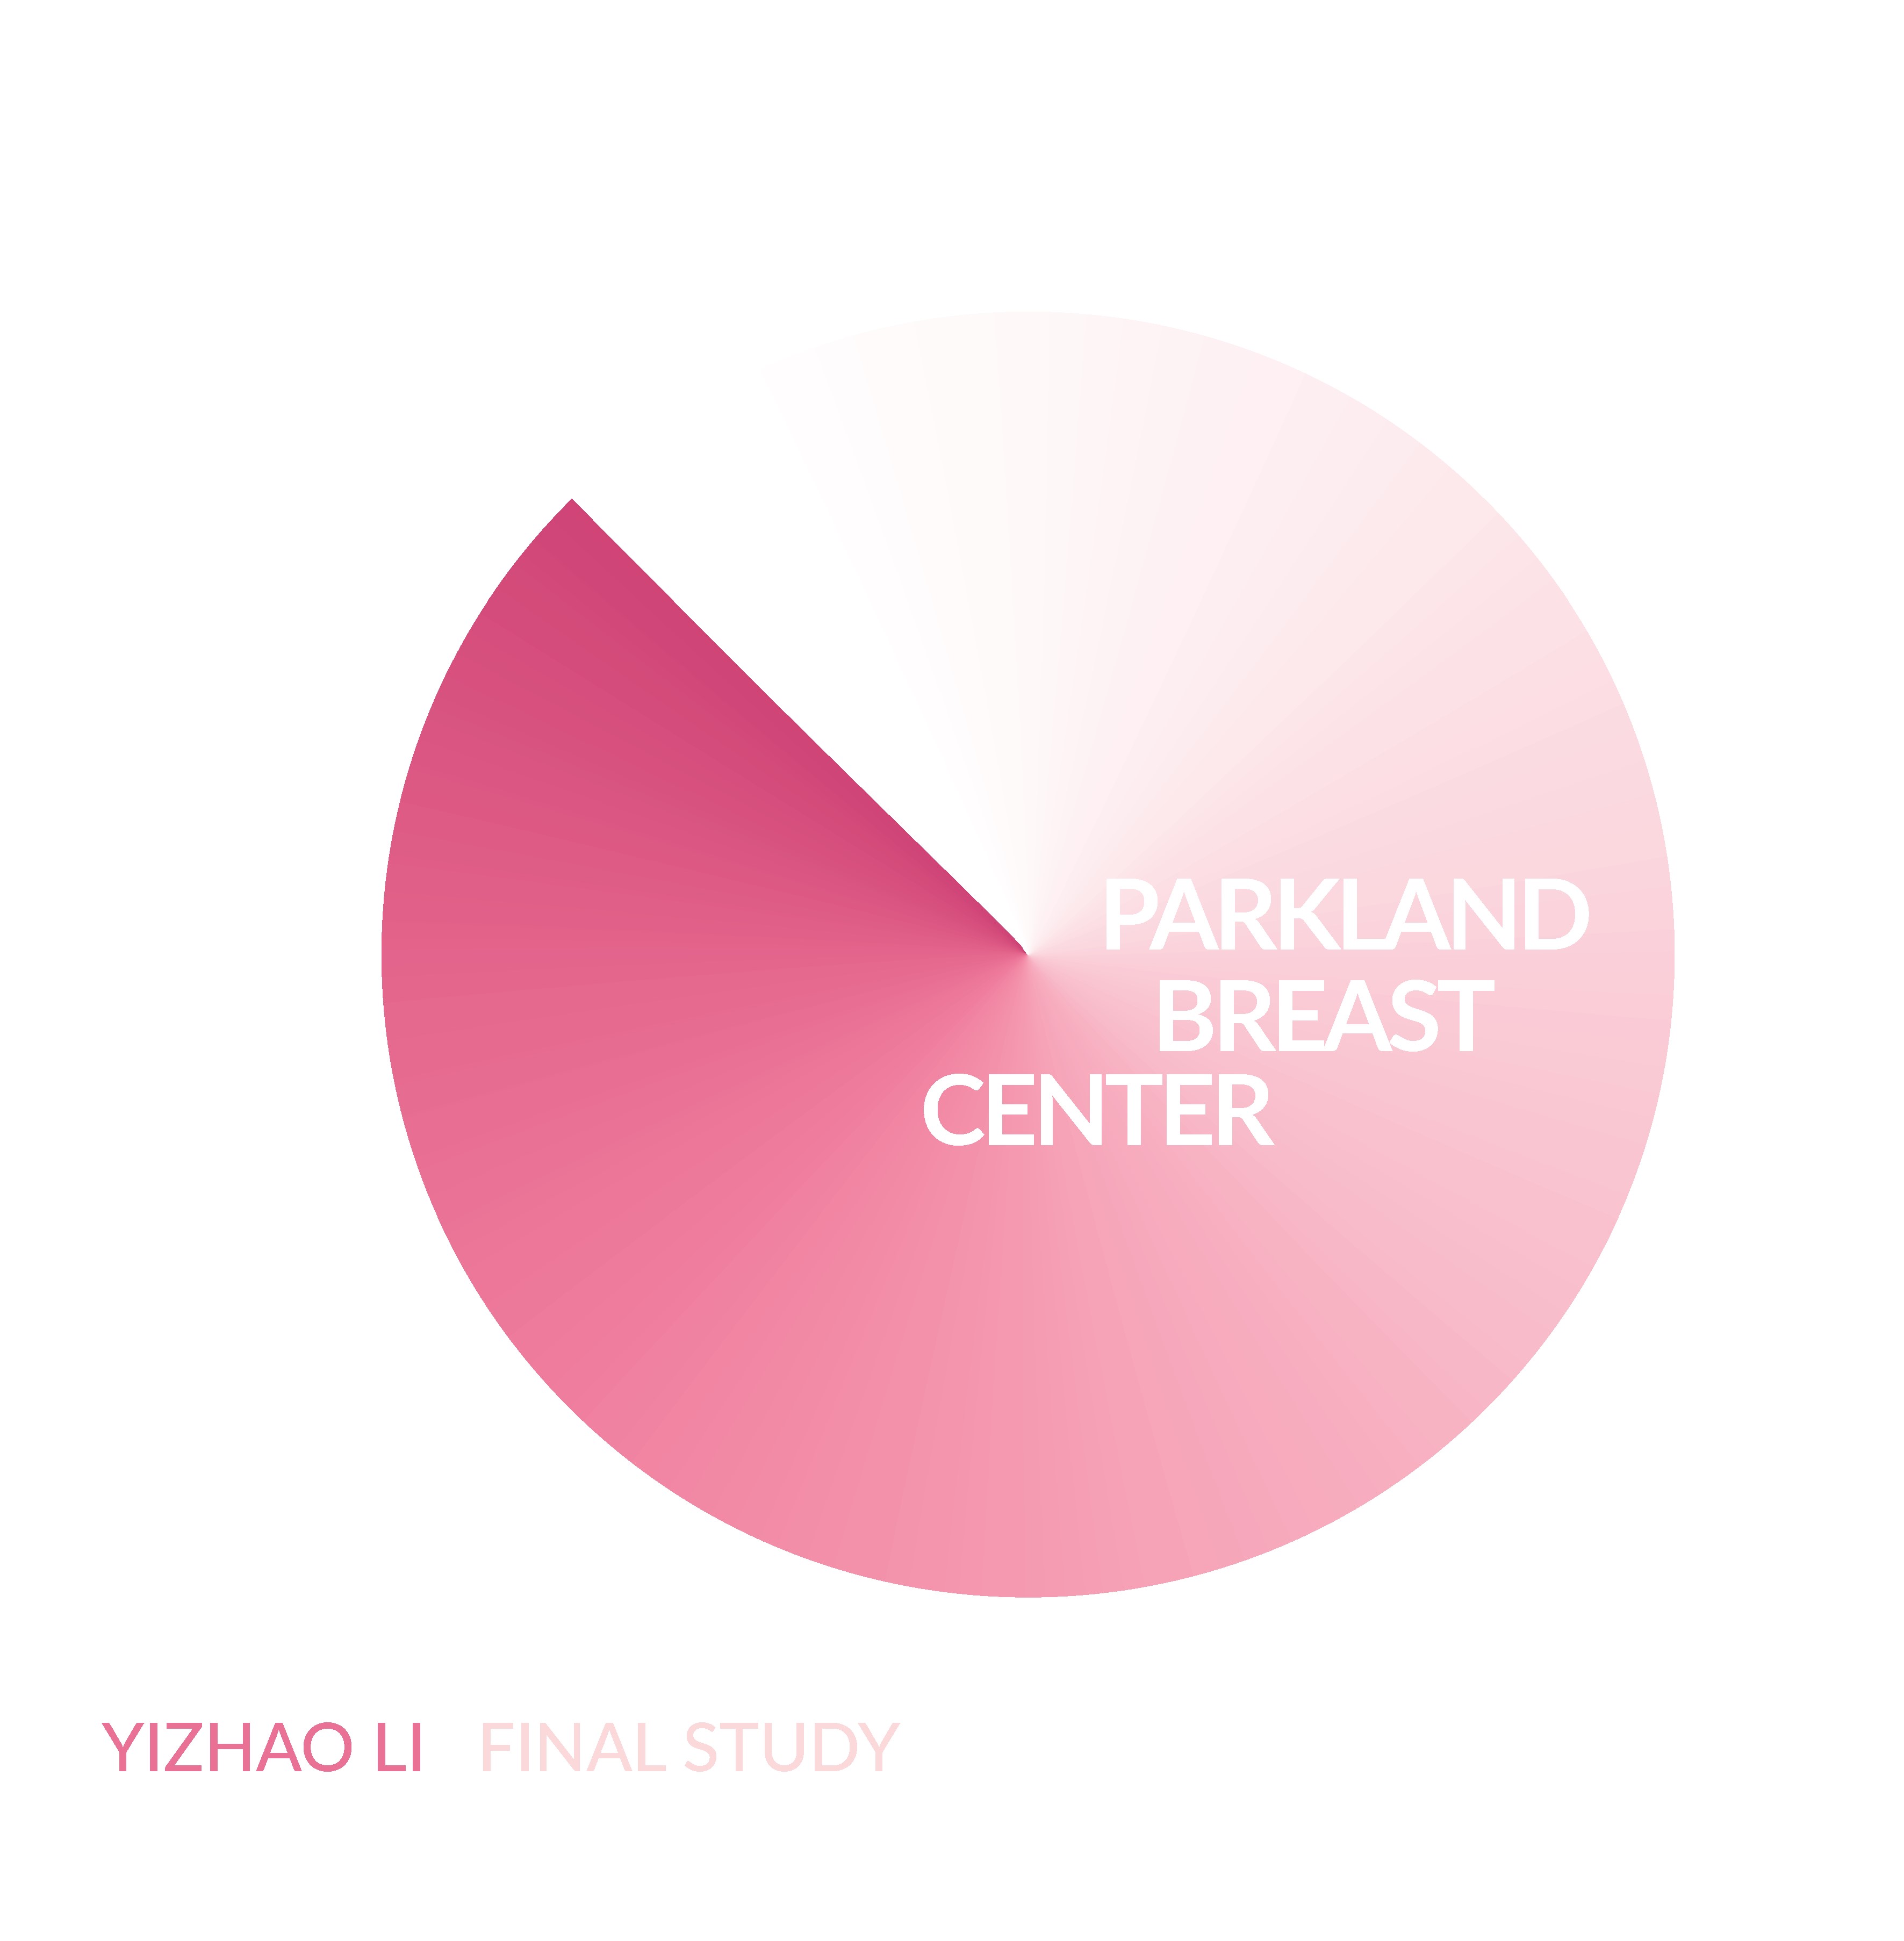 Parkland Breast Center   (click for a larger preview)